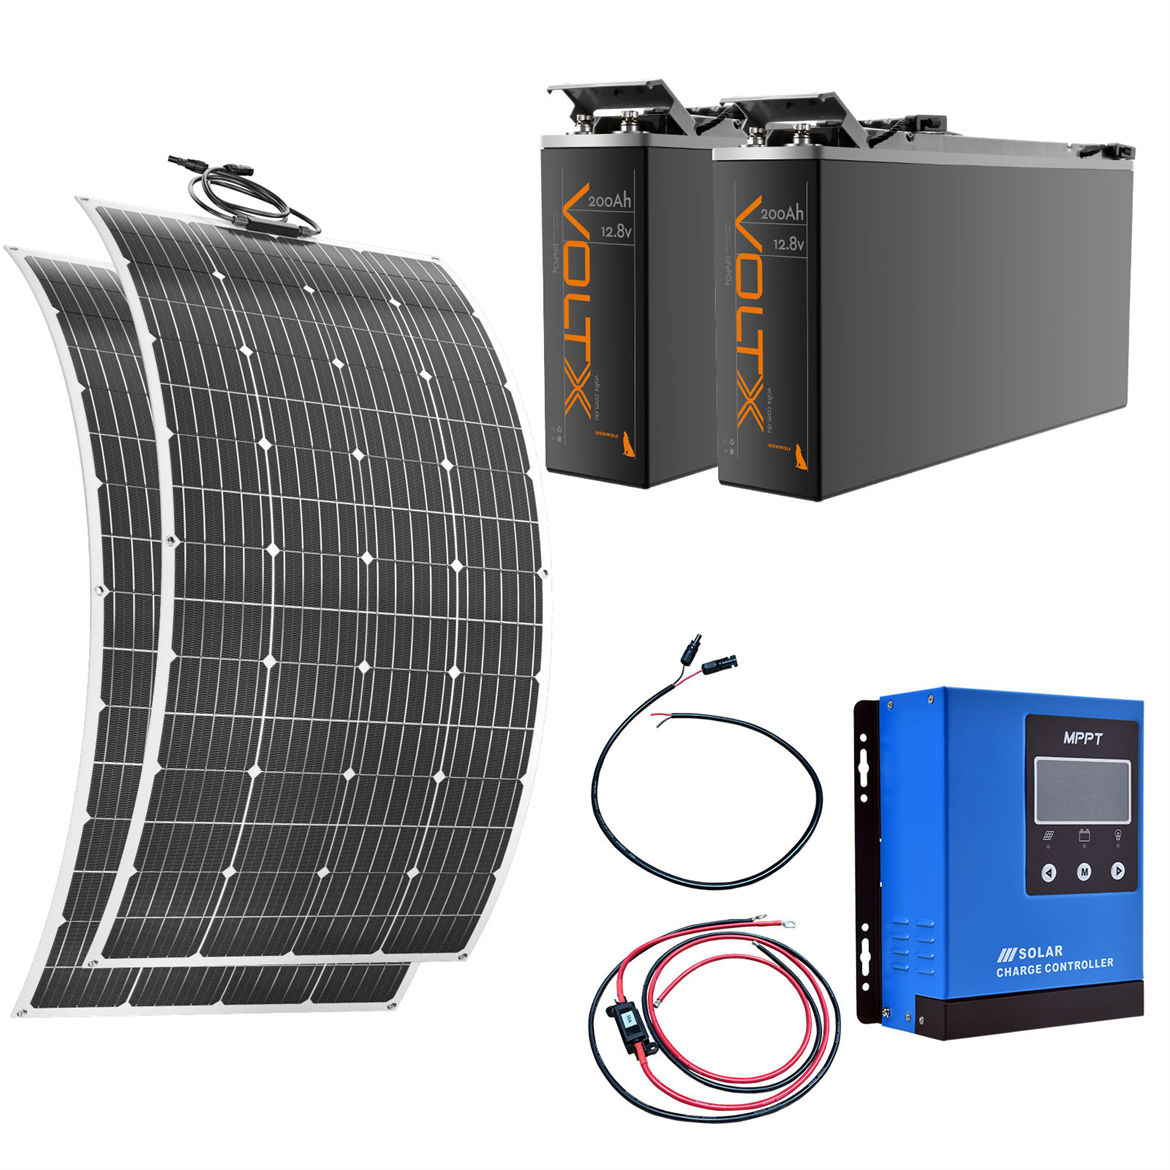 BUNDLE DEAL - VoltX 2x 200Ah Lithium Battery + 360W Solar Panel + 40A MPPT Controller with Cable